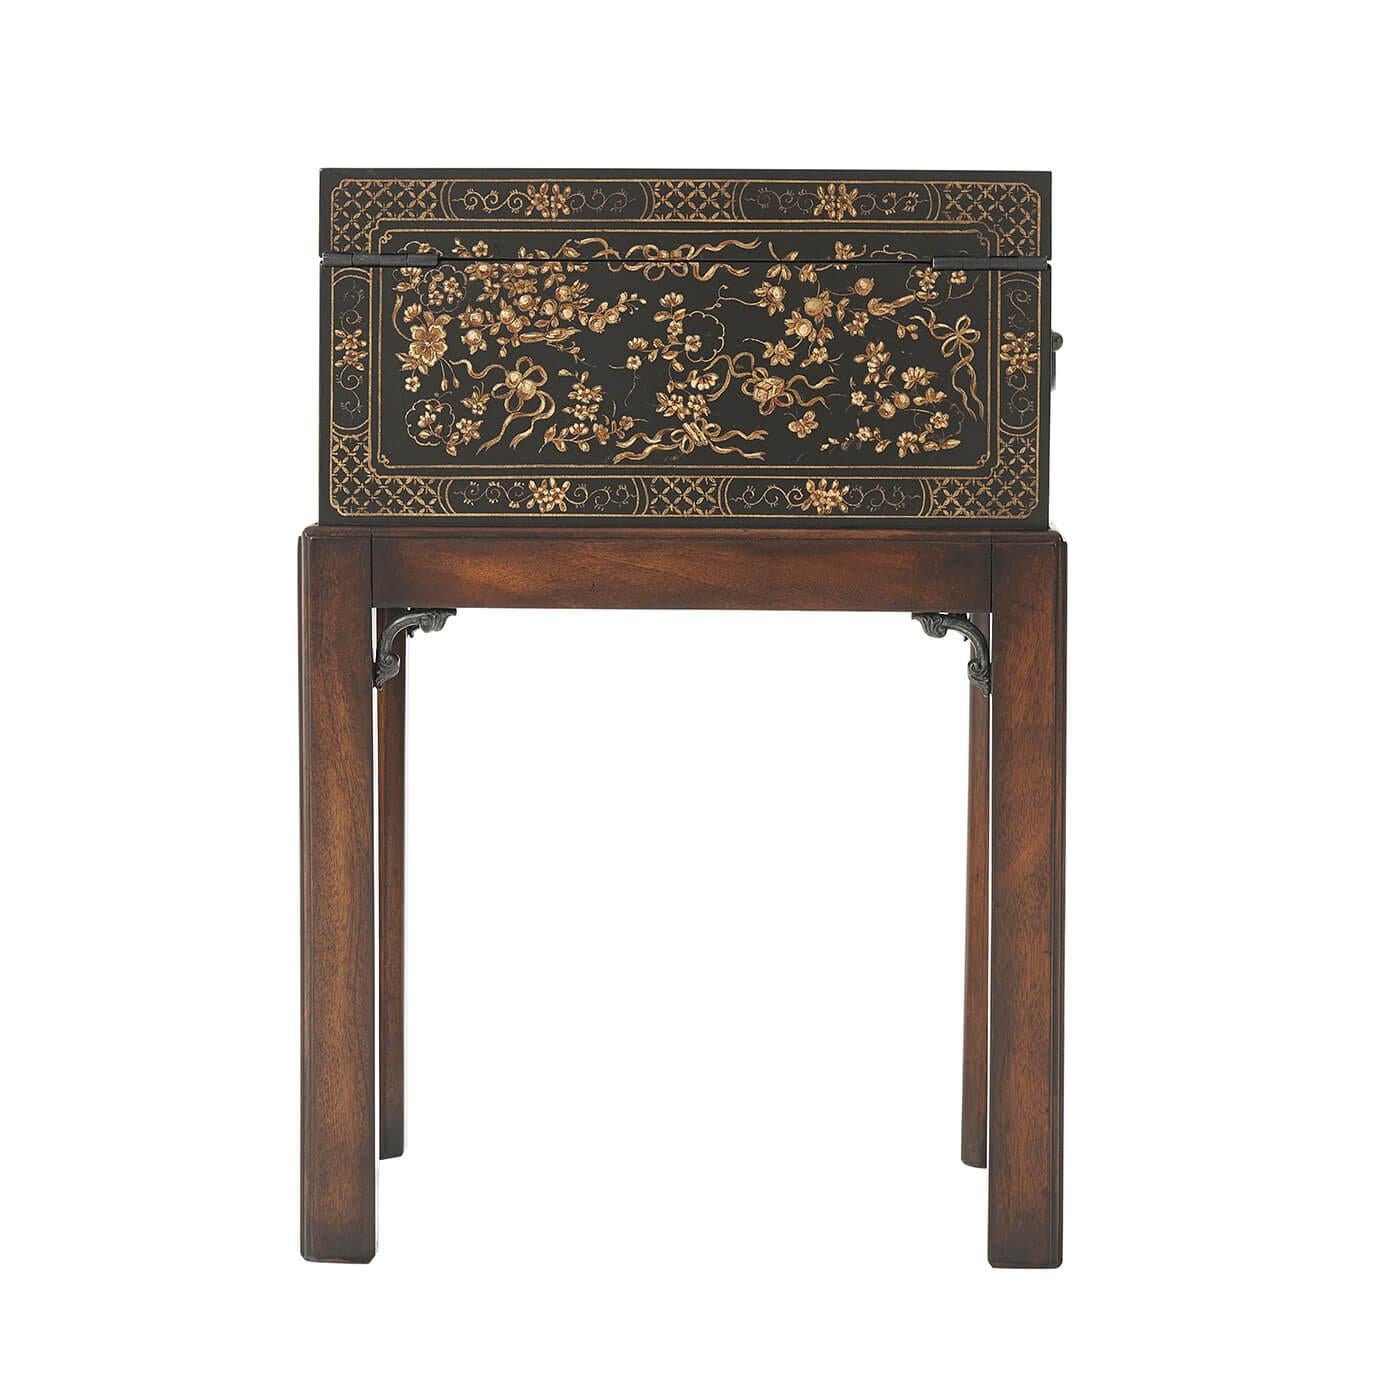 Vietnamese Chinoiserie Decorated Box on Stand